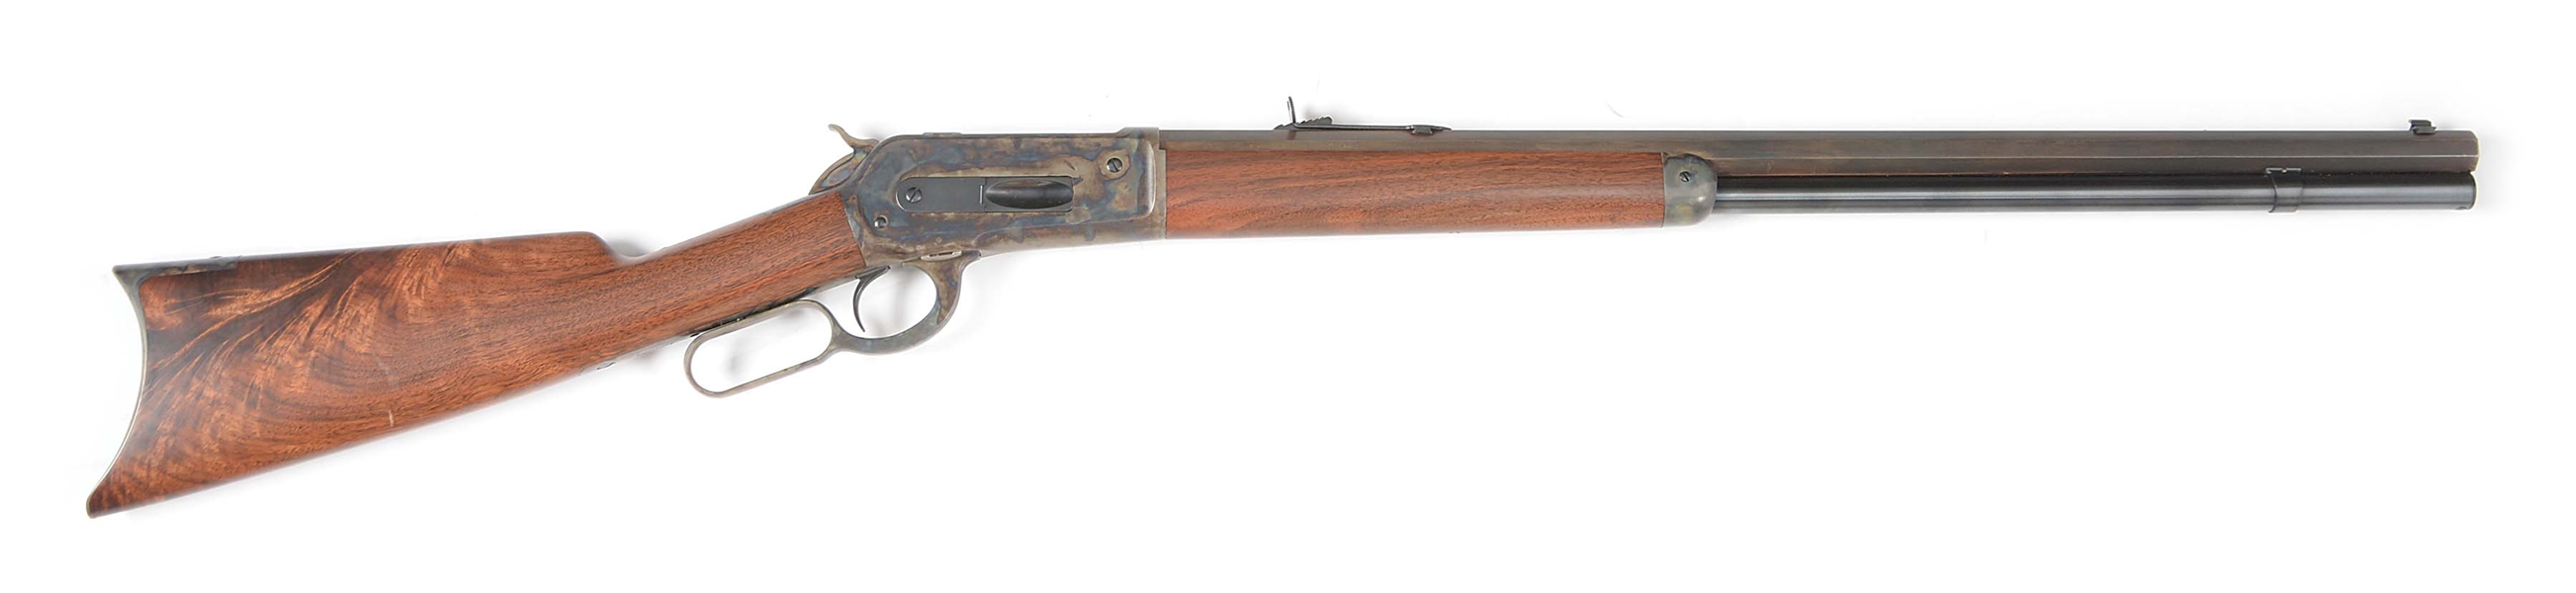 (C) WINCHESTER 1886 LEVER ACTION RIFLE (1905).